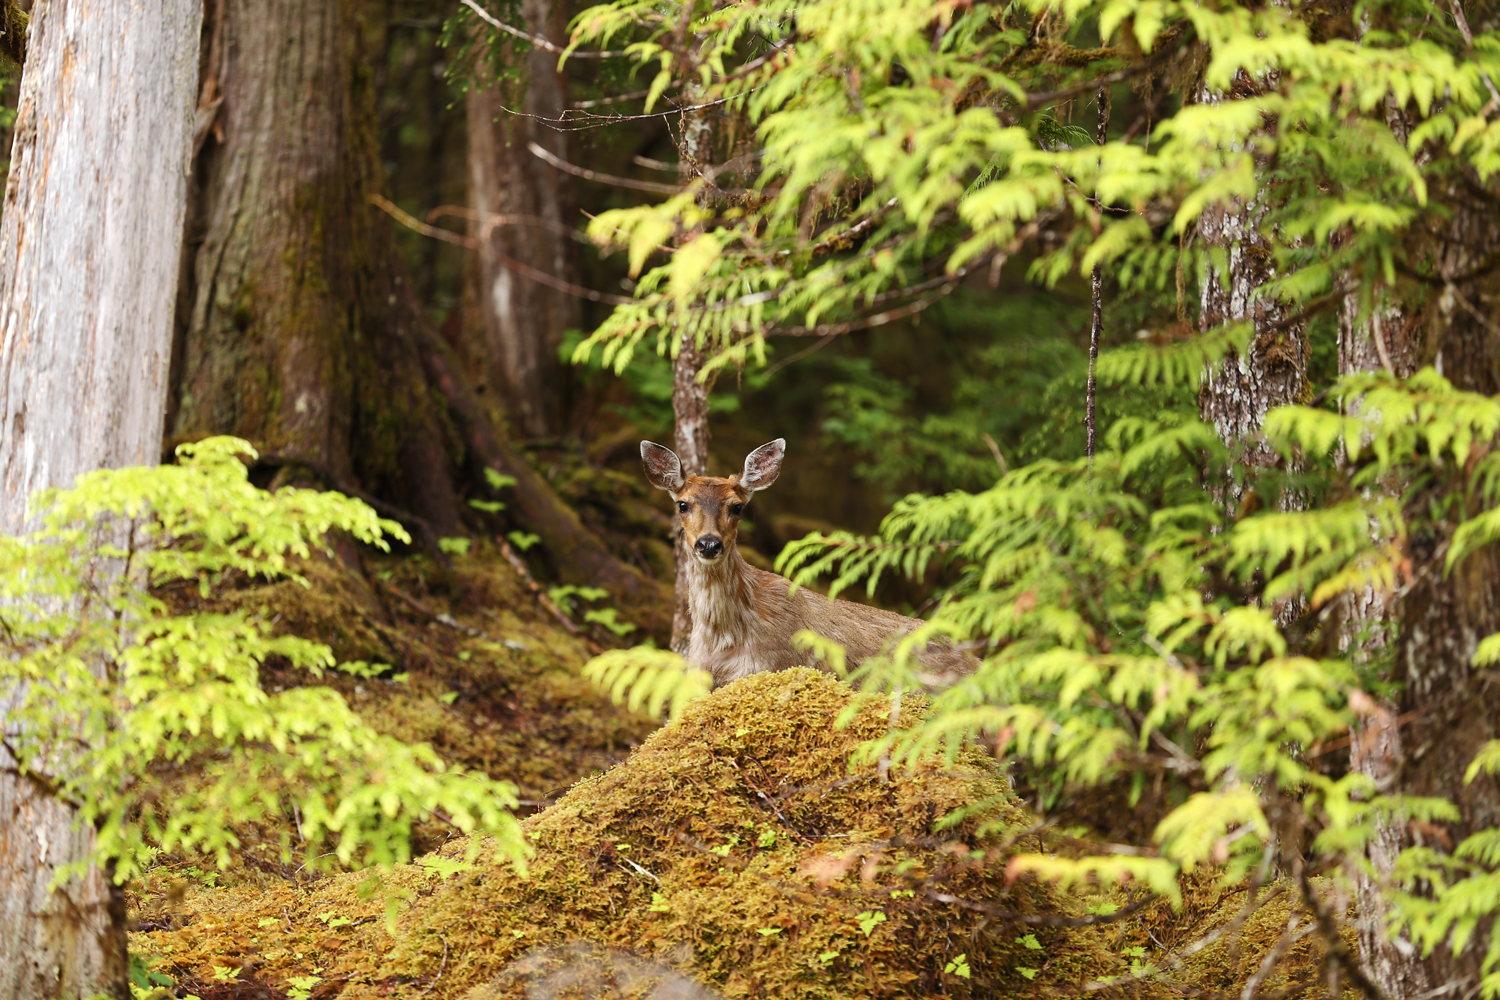 Old growth forest is very important winter habitat for deer.